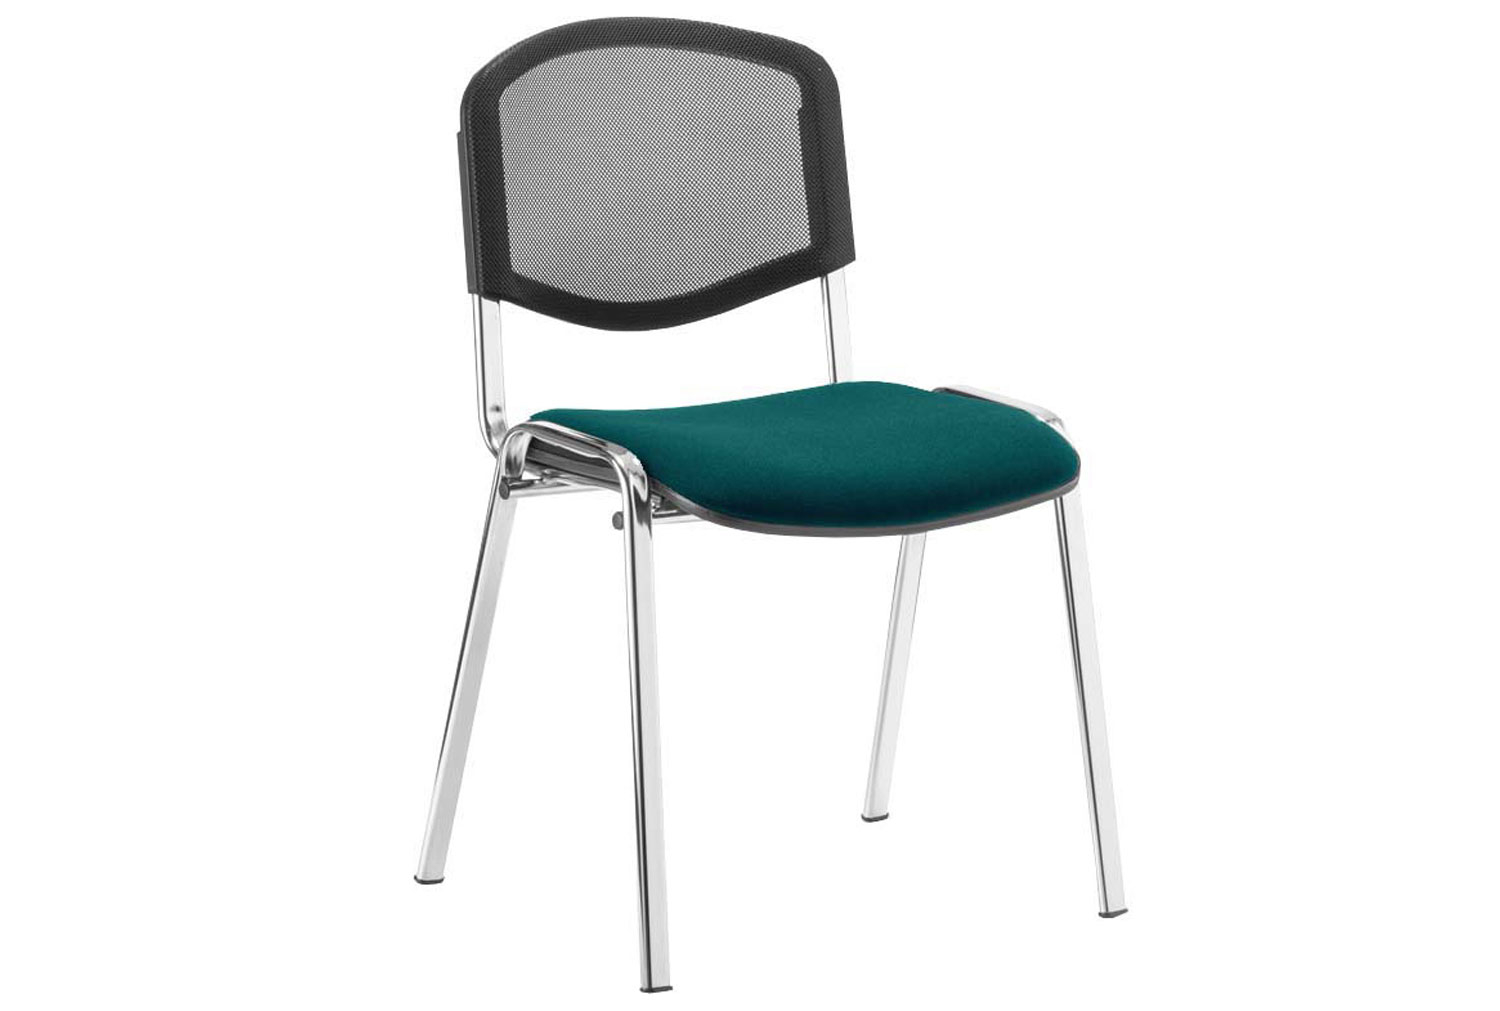 Qty 4 - ISO Chrome Frame Mesh Back Conference Office Chair (Maringa Teal)